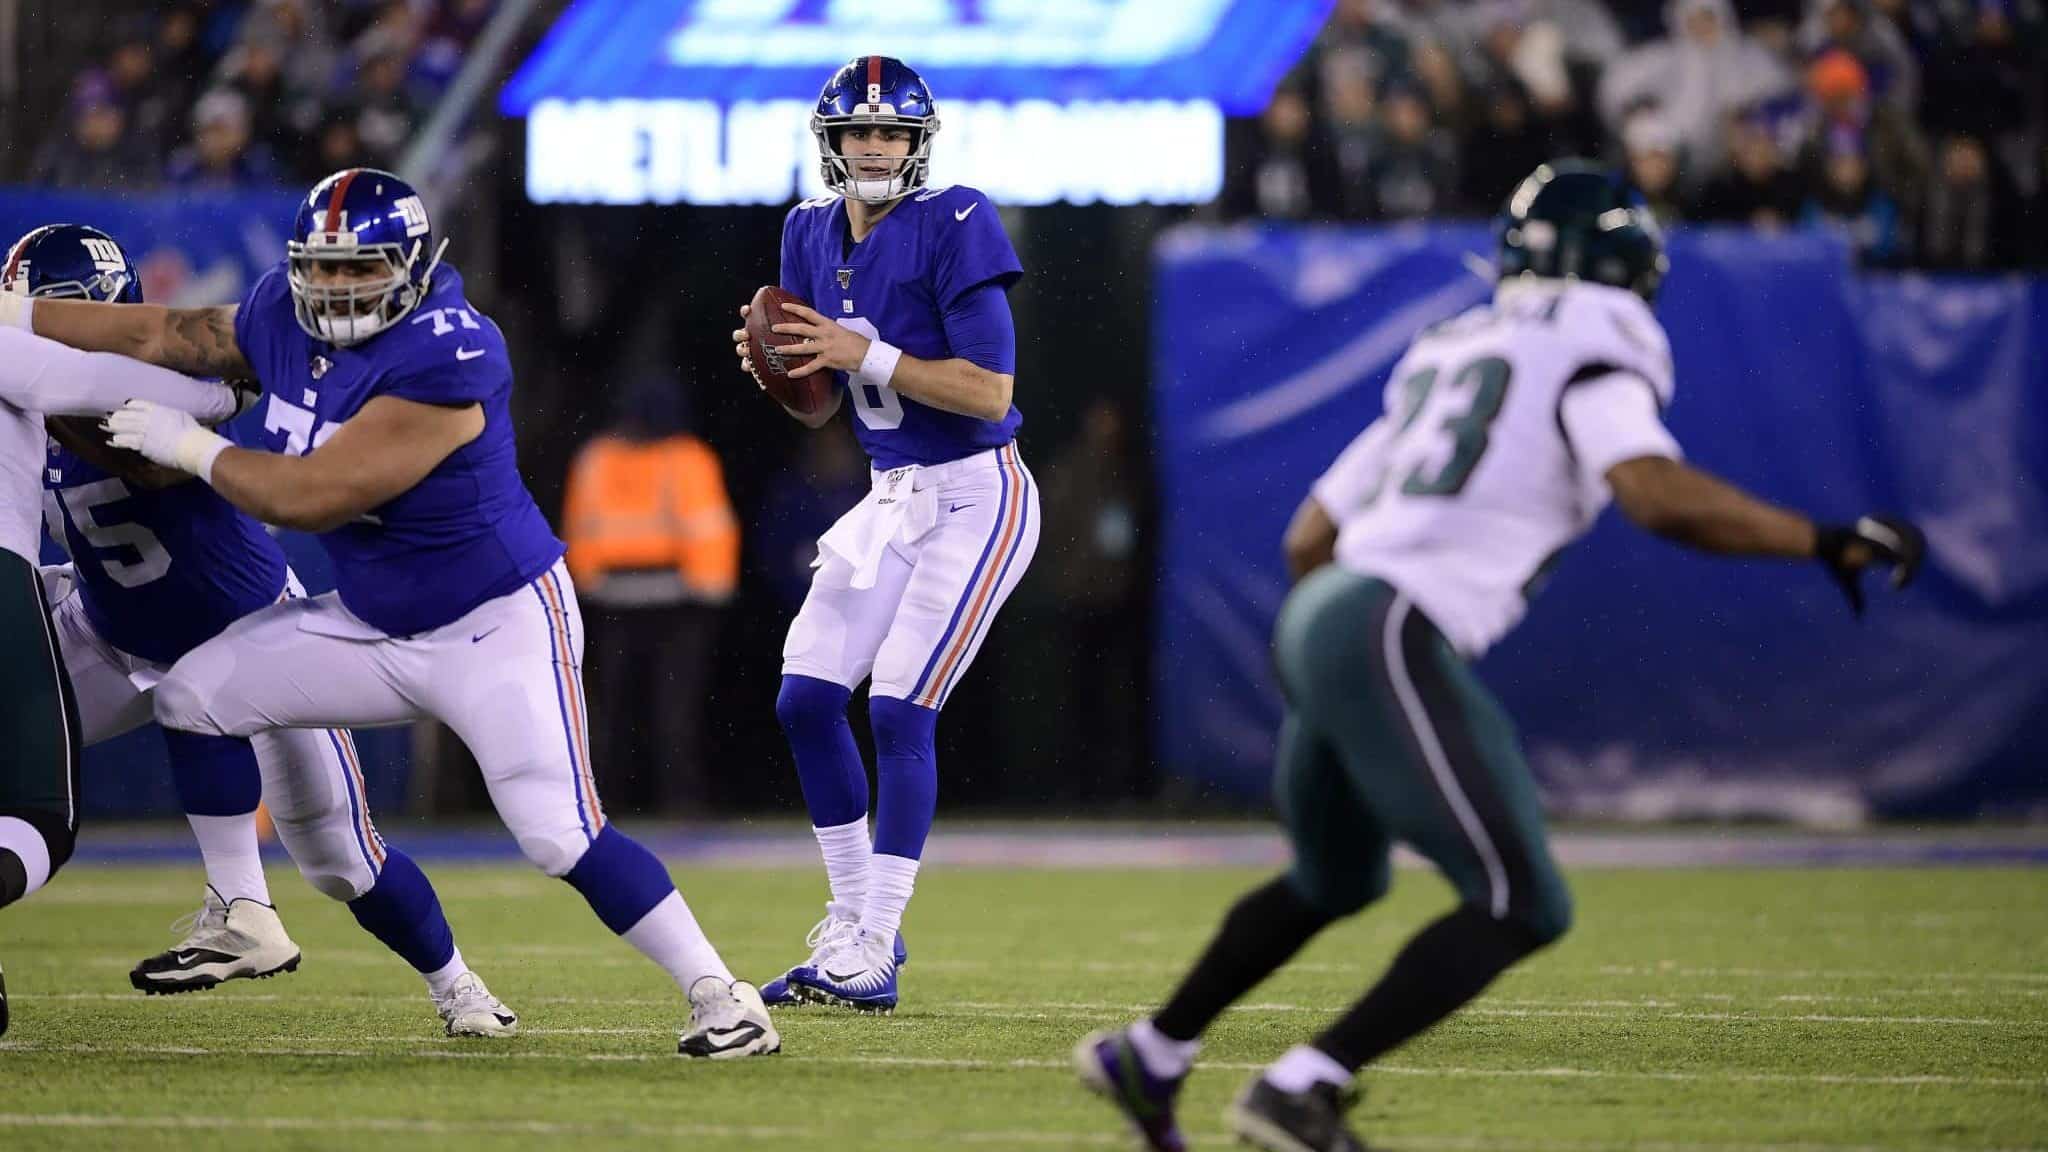 EAST RUTHERFORD, NEW JERSEY - DECEMBER 29: Daniel Jones #8 of the New York Giants looks to throw a pass against the Philadelphia Eagles during the first quarter in the game at MetLife Stadium on December 29, 2019 in East Rutherford, New Jersey.